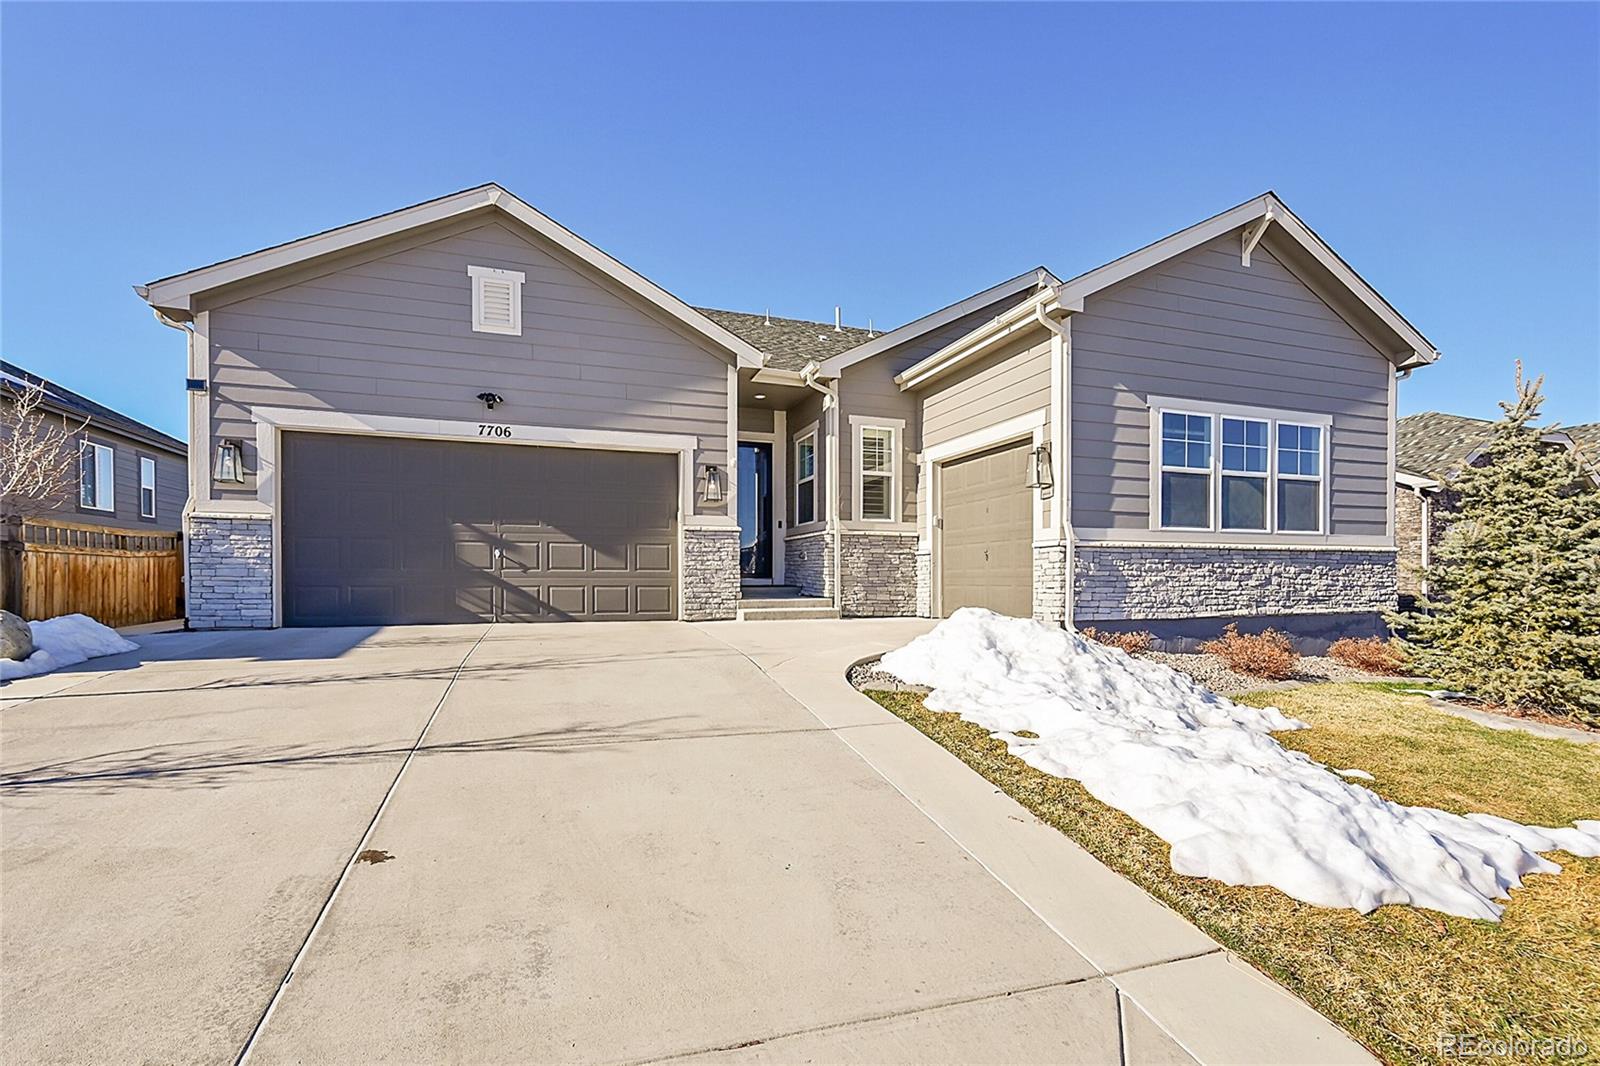 Report Image for 7706  Greenwater Circle,Castle Rock, Colorado